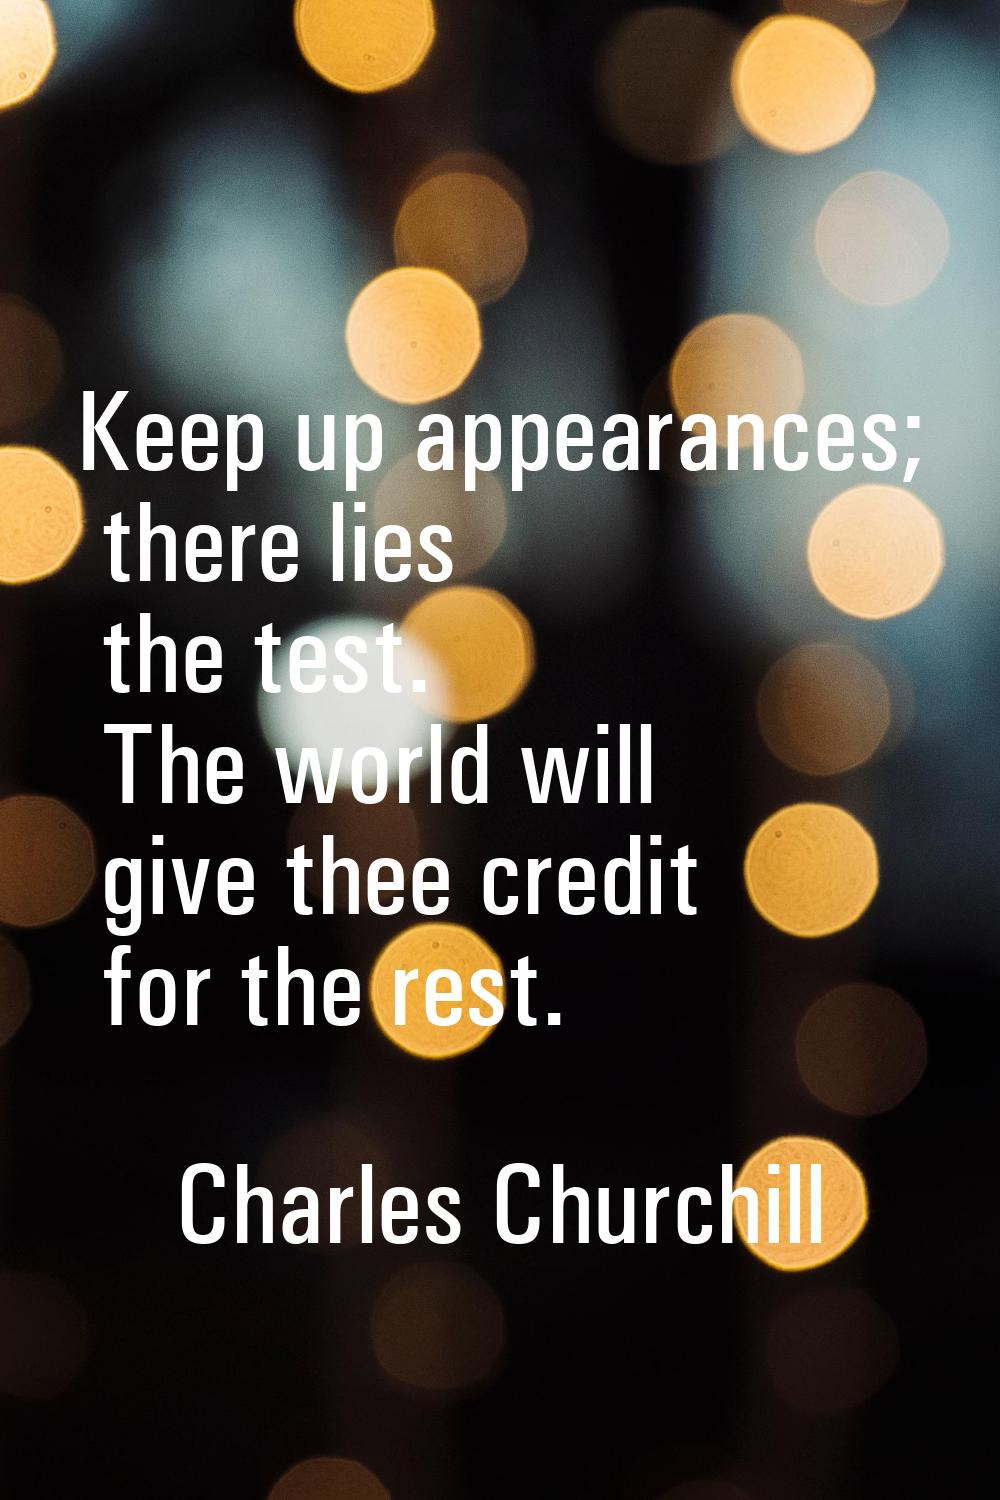 Keep up appearances; there lies the test. The world will give thee credit for the rest.